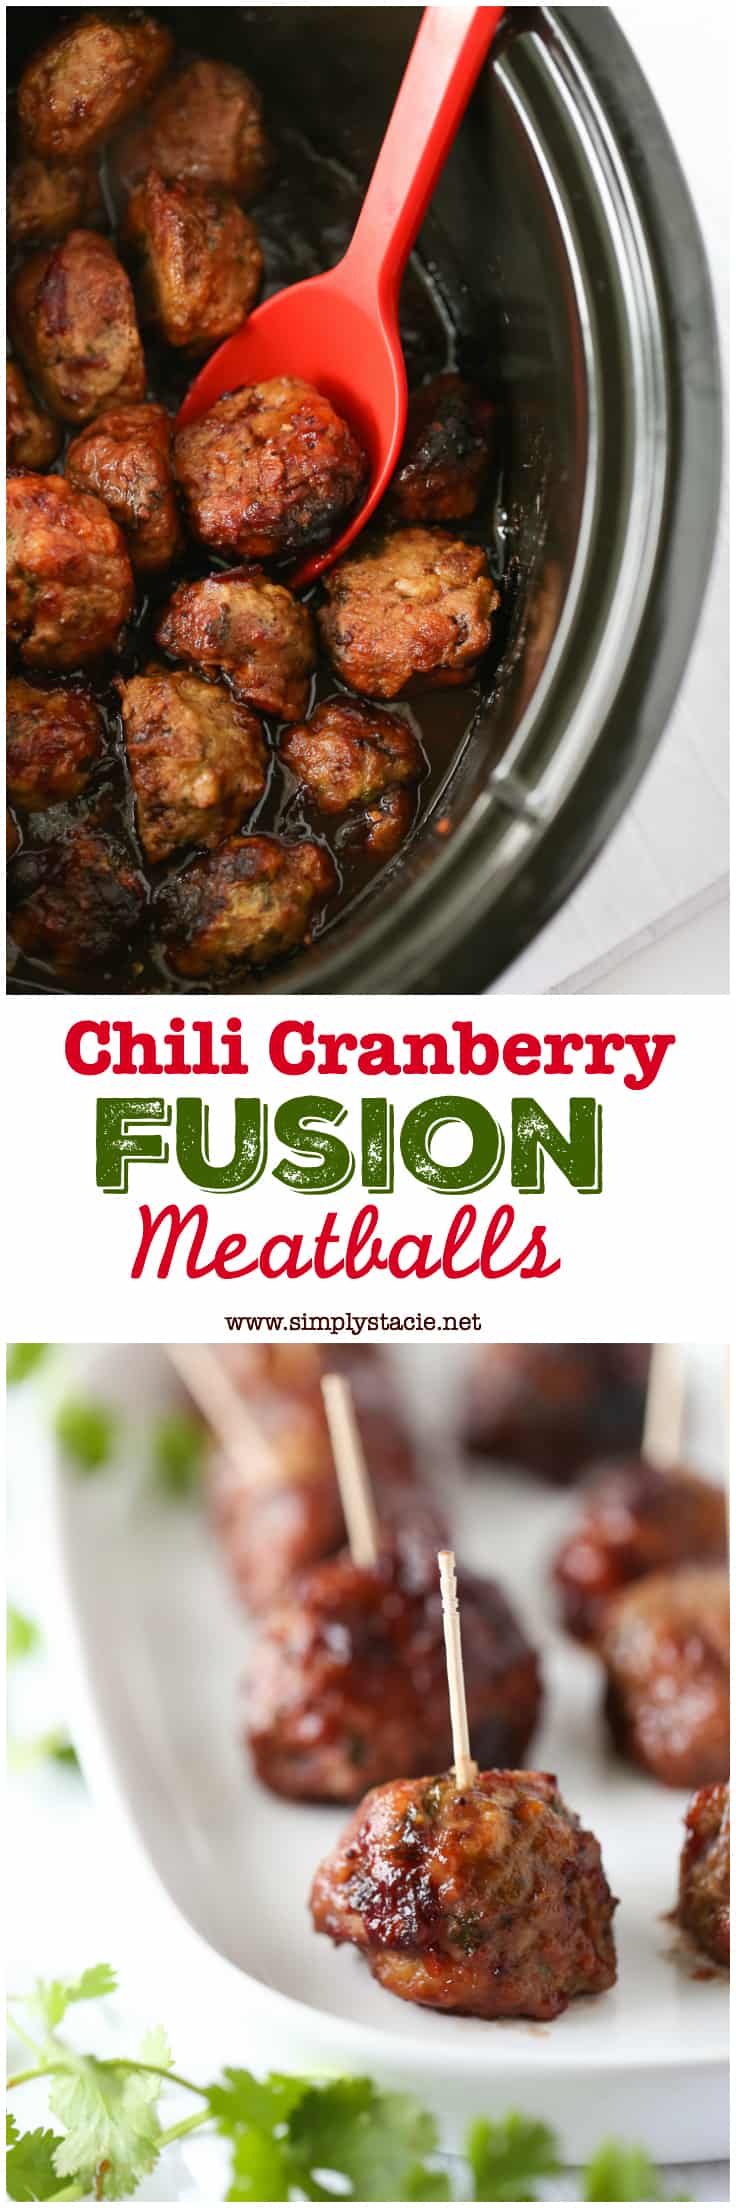 Chili Cranberry Fusion Meatballs - This easy slow cooker recipe is full of sweet heat! Made with ground chicken, Asian flavours plus cranberries! Yum. | simplystacie.net